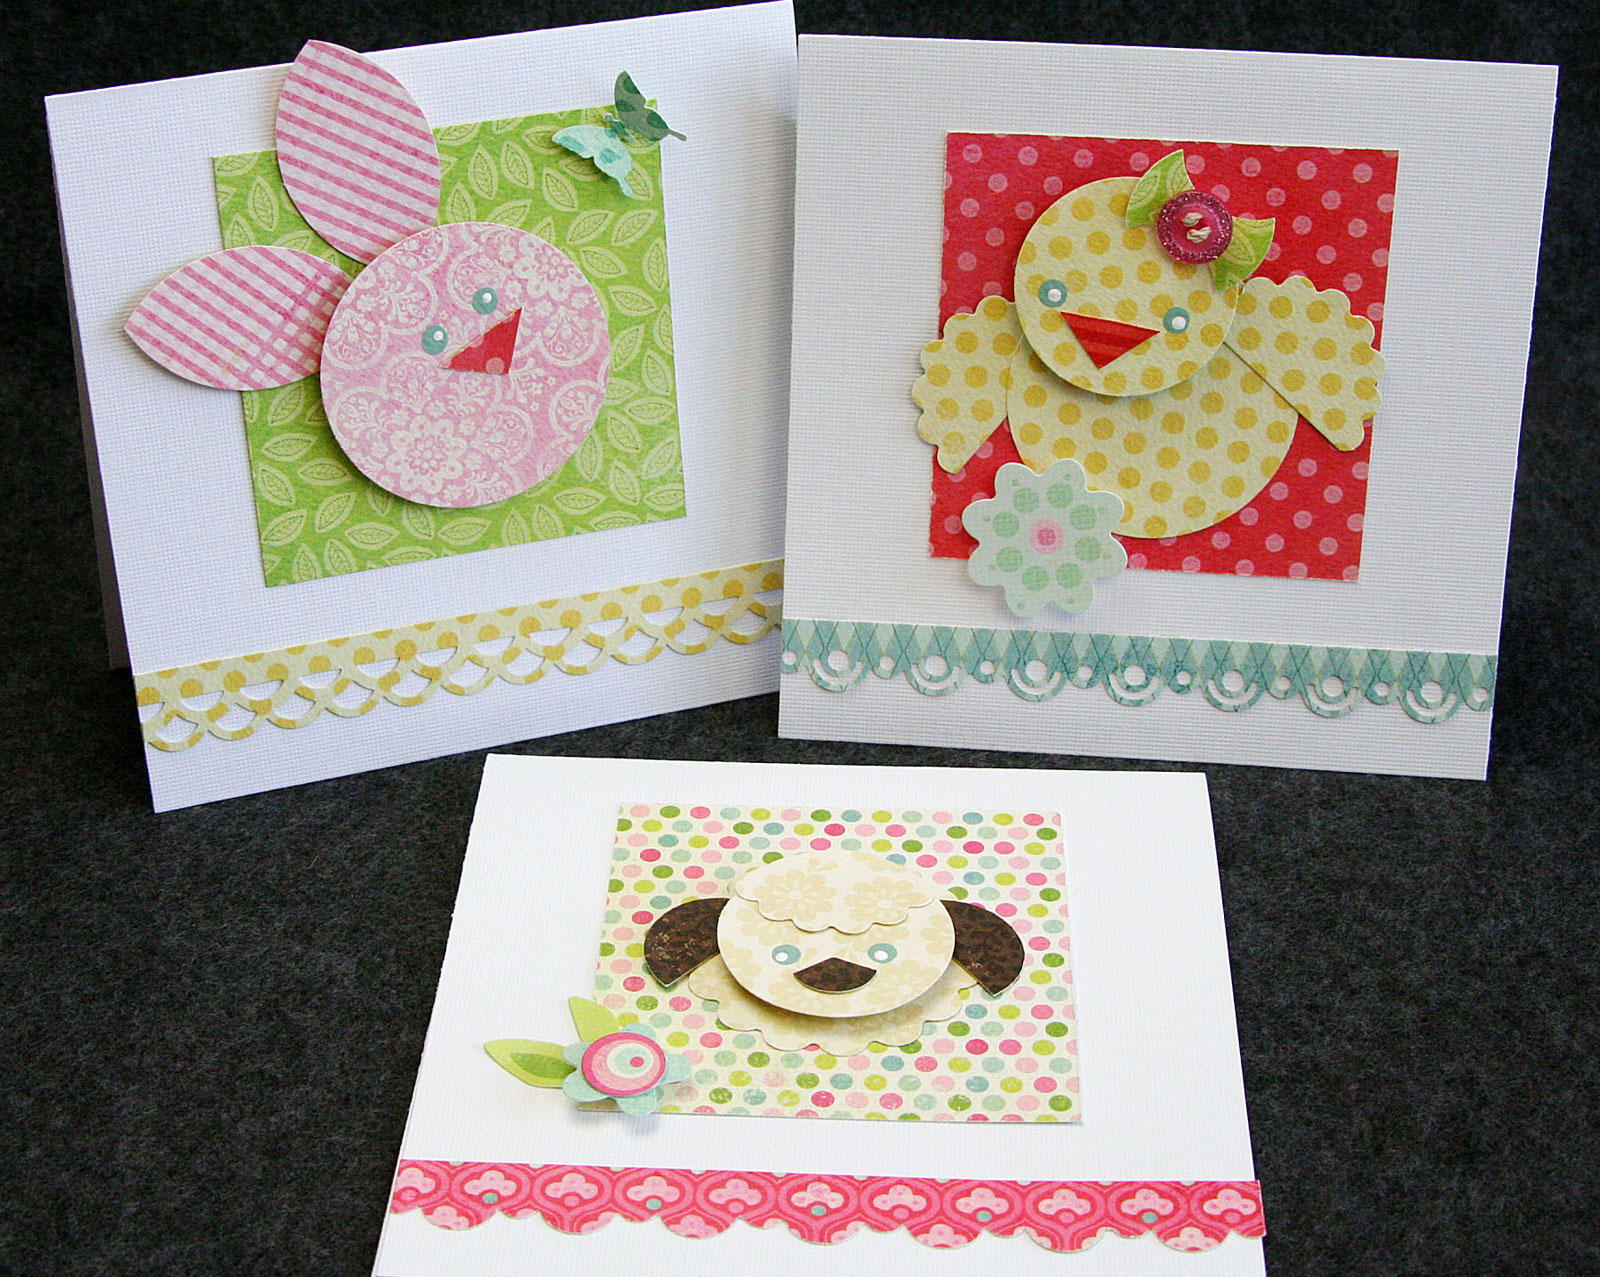 23 CREATIVE EASTER CARD INSPIRATIONS FOR YOUR LOVED ONES Regarding Easter Card Template Ks2